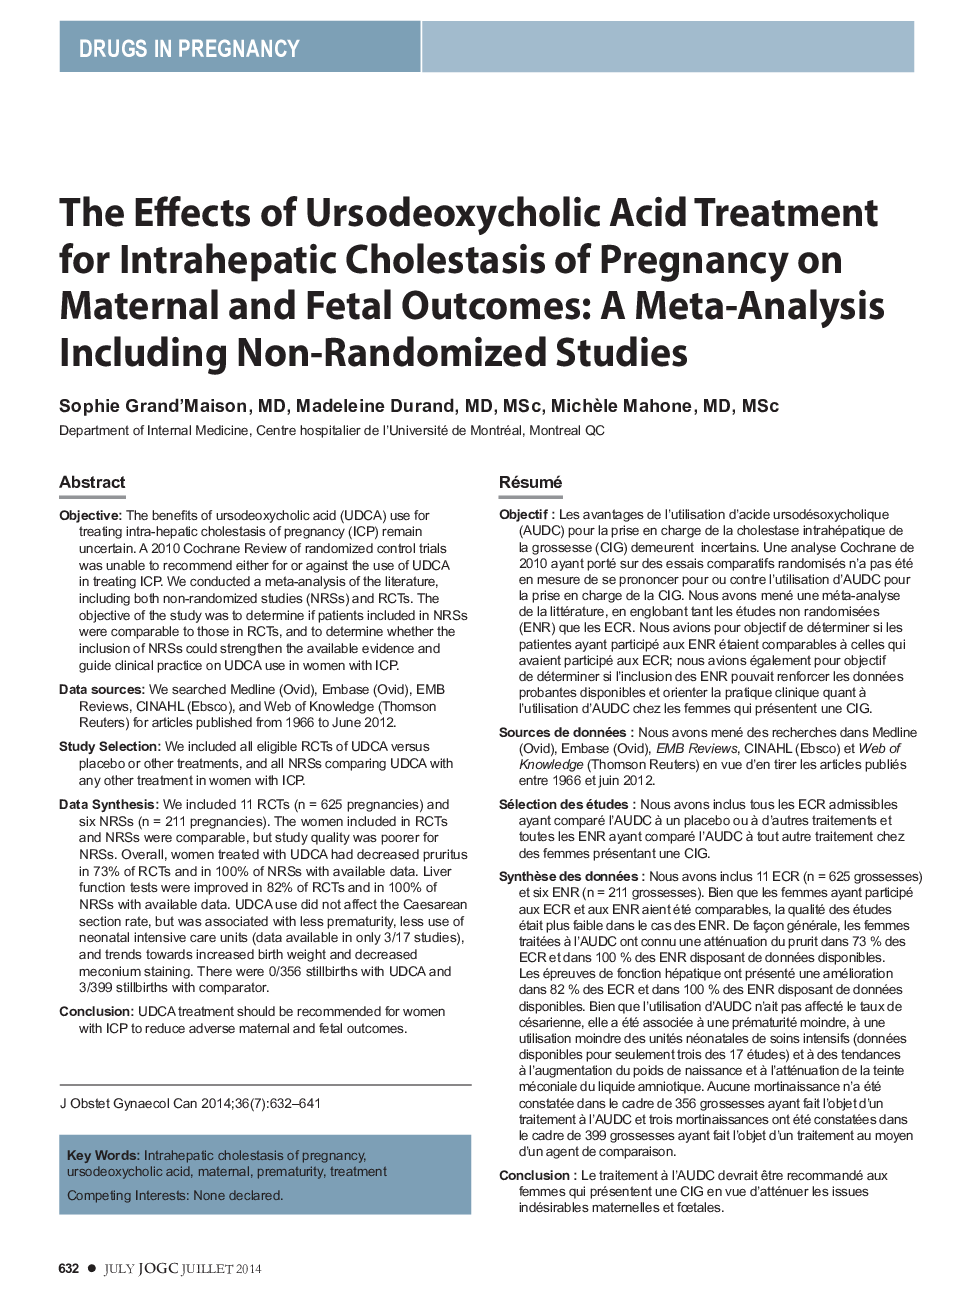 The Effects of Ursodeoxycholic Acid Treatment for Intrahepatic Cholestasis of Pregnancy on Maternal and Fetal Outcomes: A Meta-Analysis Including Non-Randomized Studies